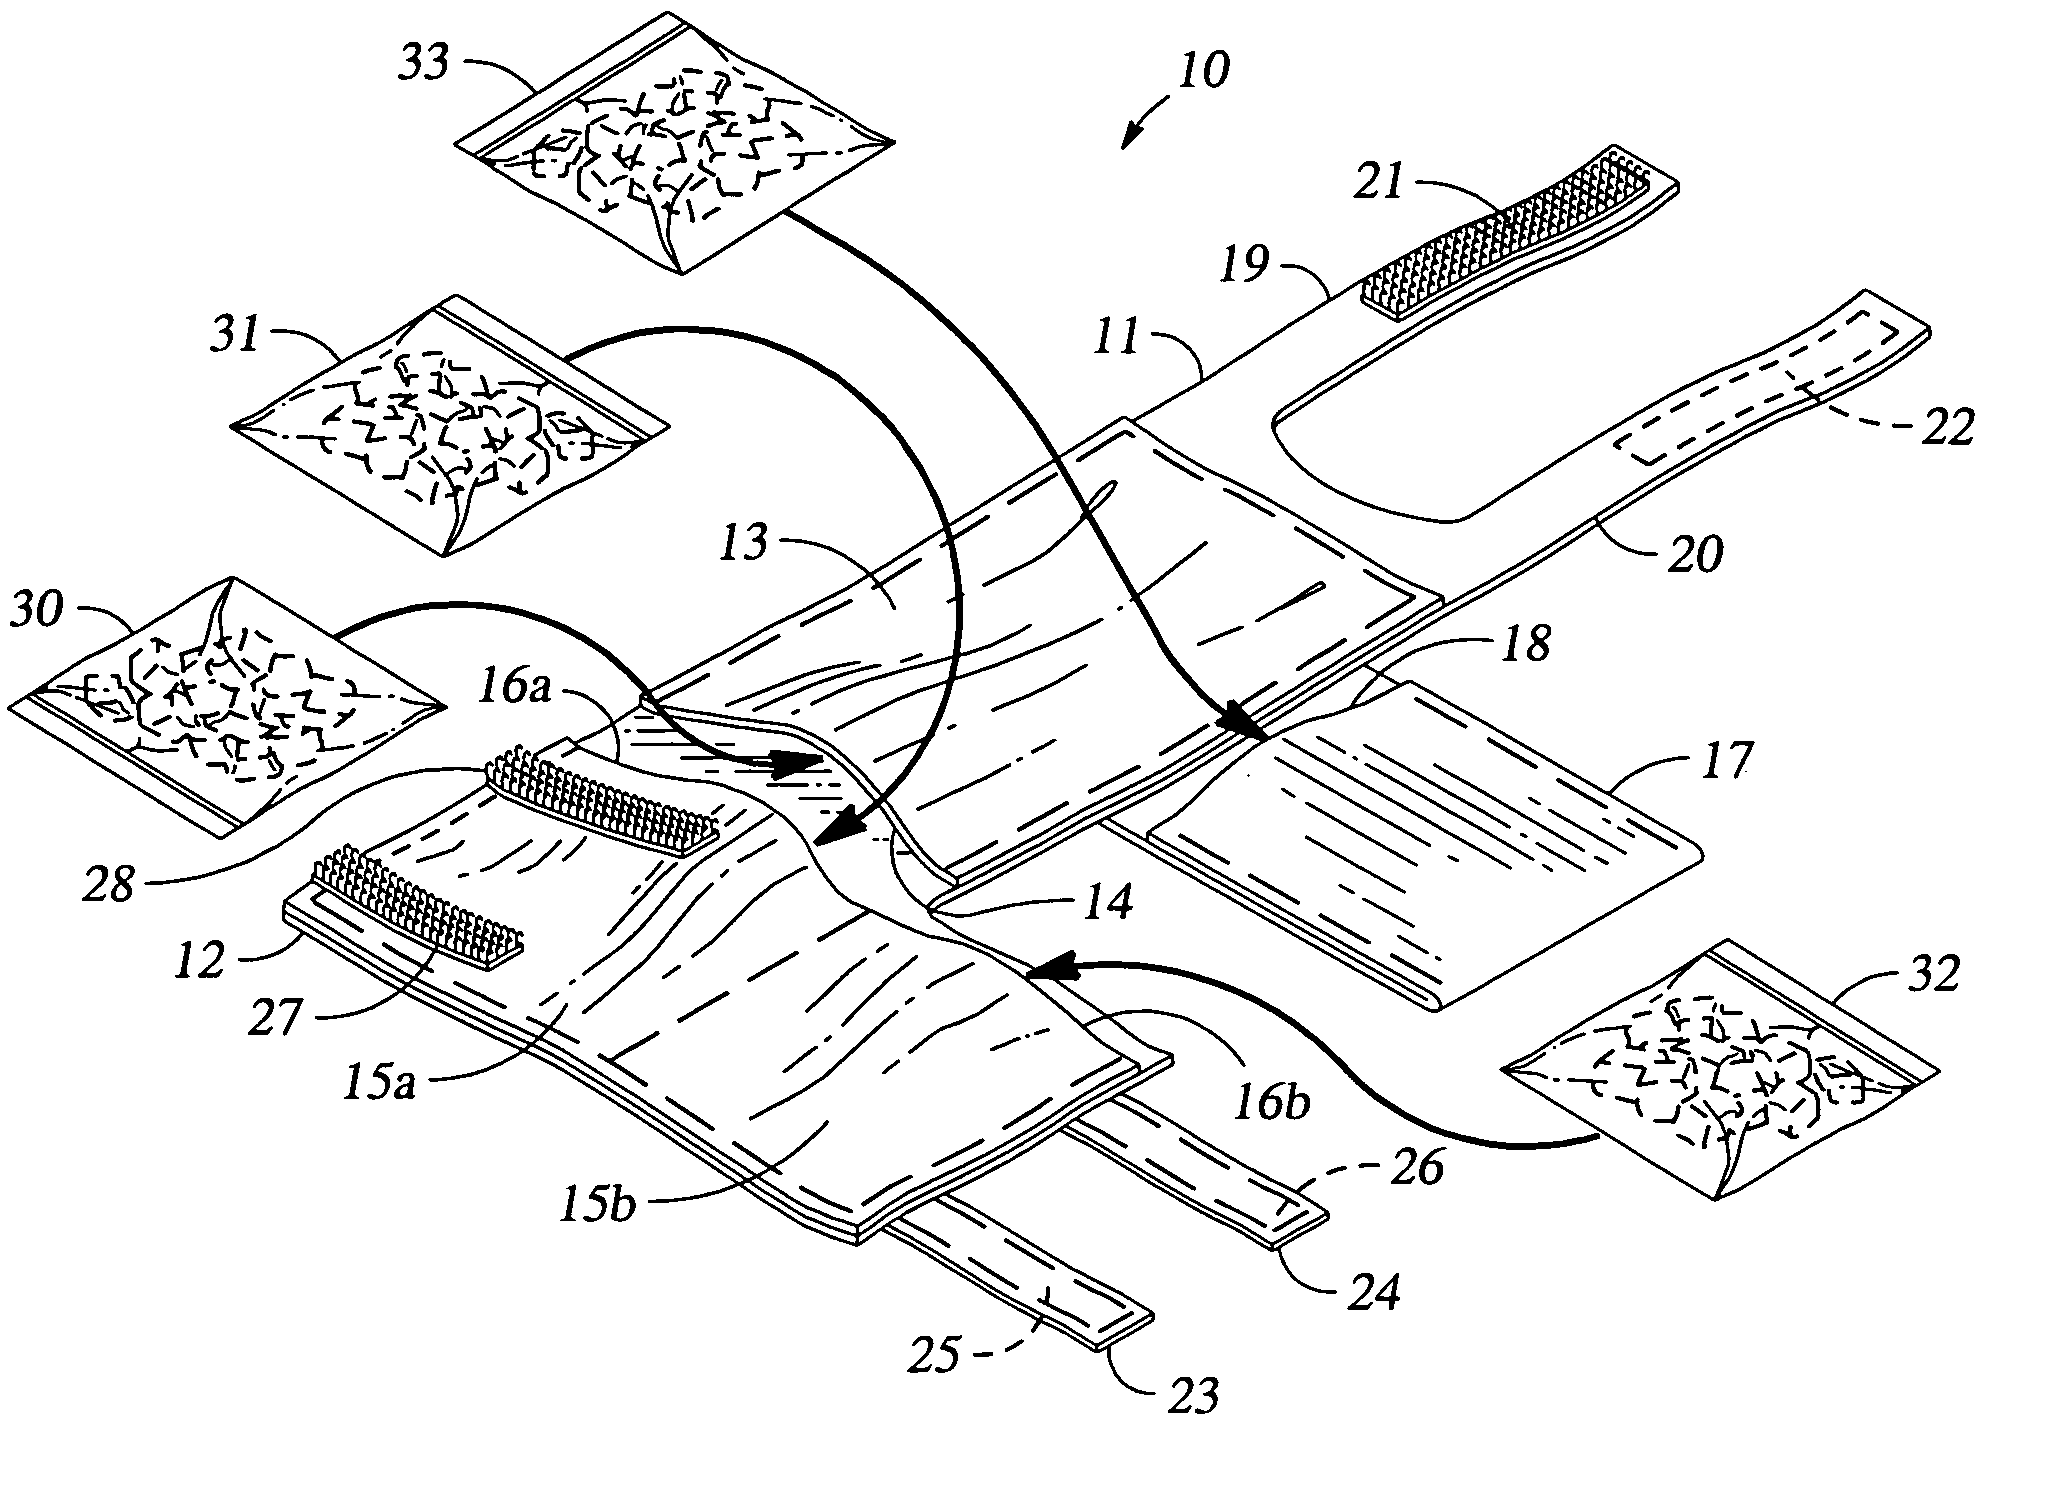 Device for cooling shoulder joint and nearby muscles